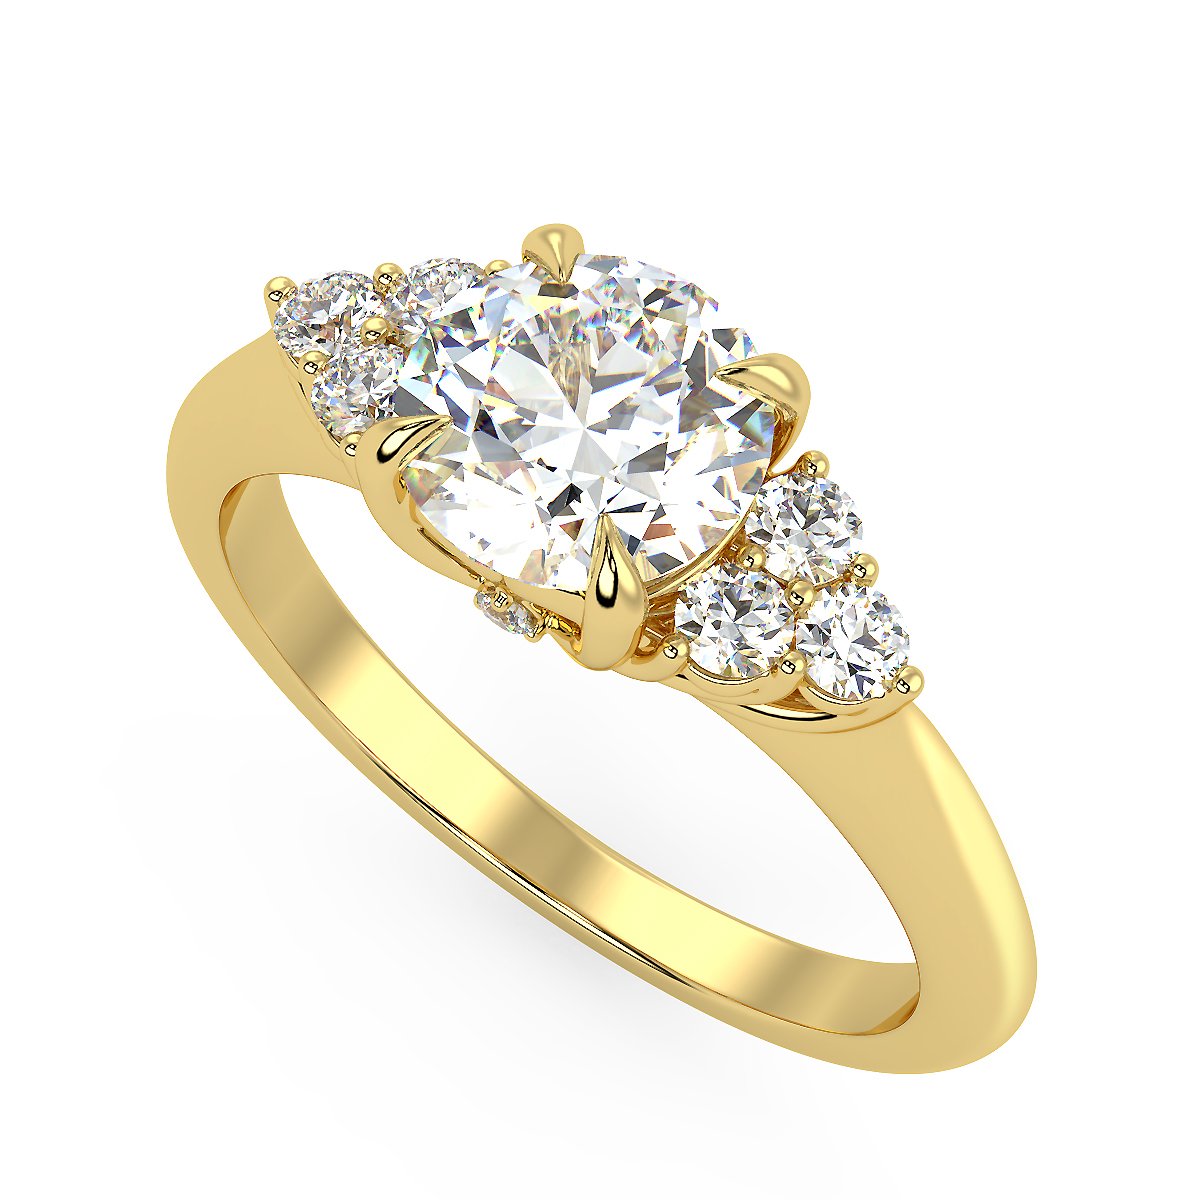 Zania Engagement Ring in Yellow Gold